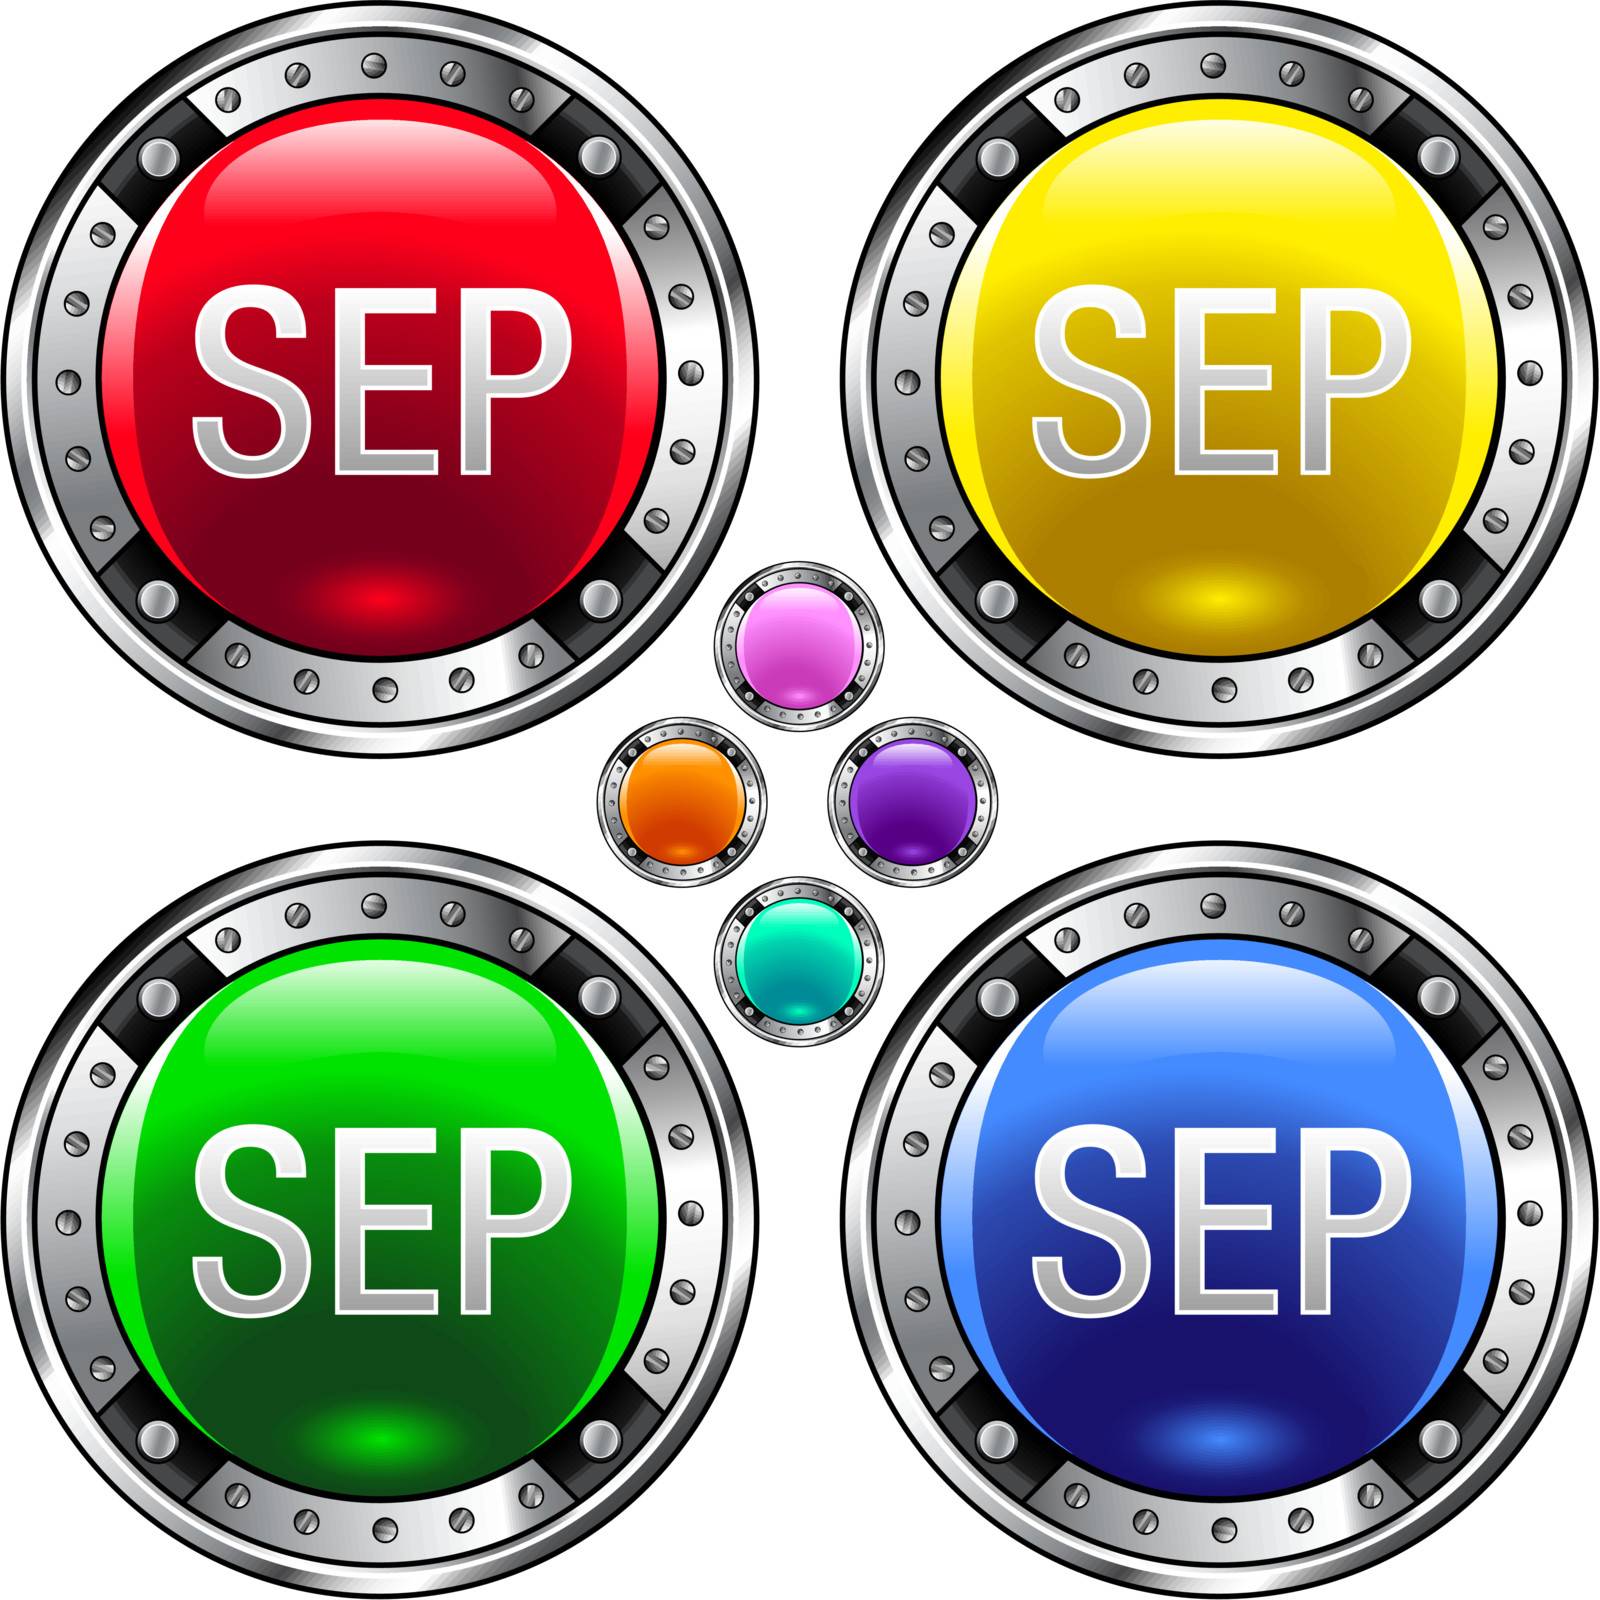 September calendar month icon on round colorful vector buttons suitable for use on websites, in print materials or in advertisements. Set includes red, yellow, green, and blue versions.